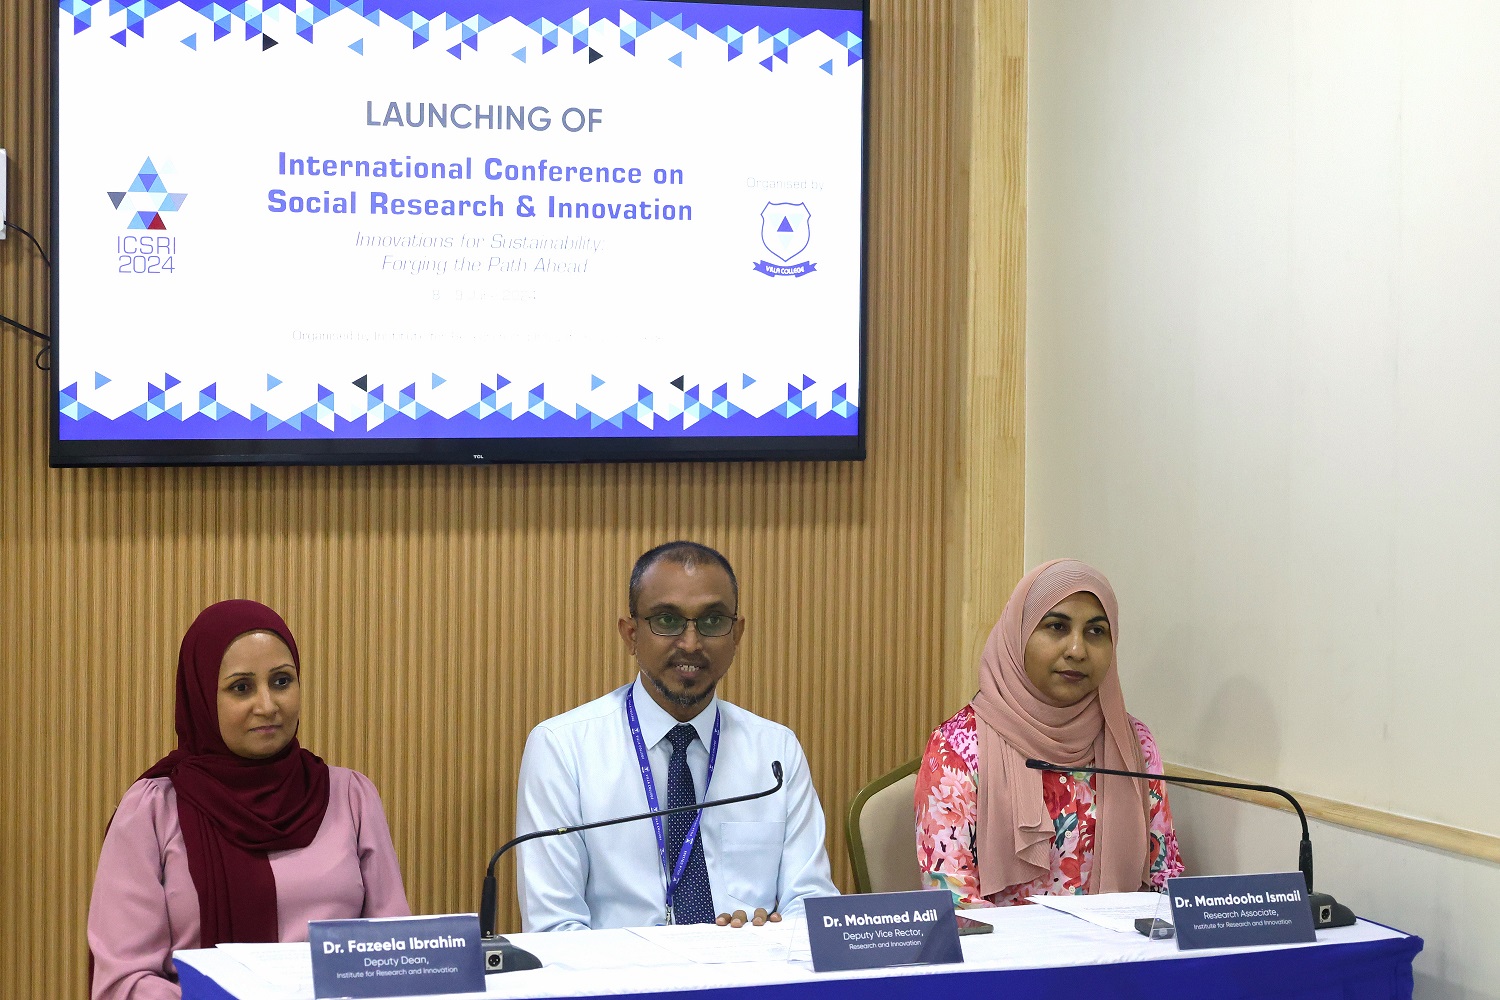 THE INSTITUTE FOR RESEARCH AND INNOVATION OF VILLA COLLEGE ANNOUNCES THE 8TH INTERNATIONAL CONFERENCE ON SOCIAL RESEARCH AND INNOVATION (ICSRI 2024)